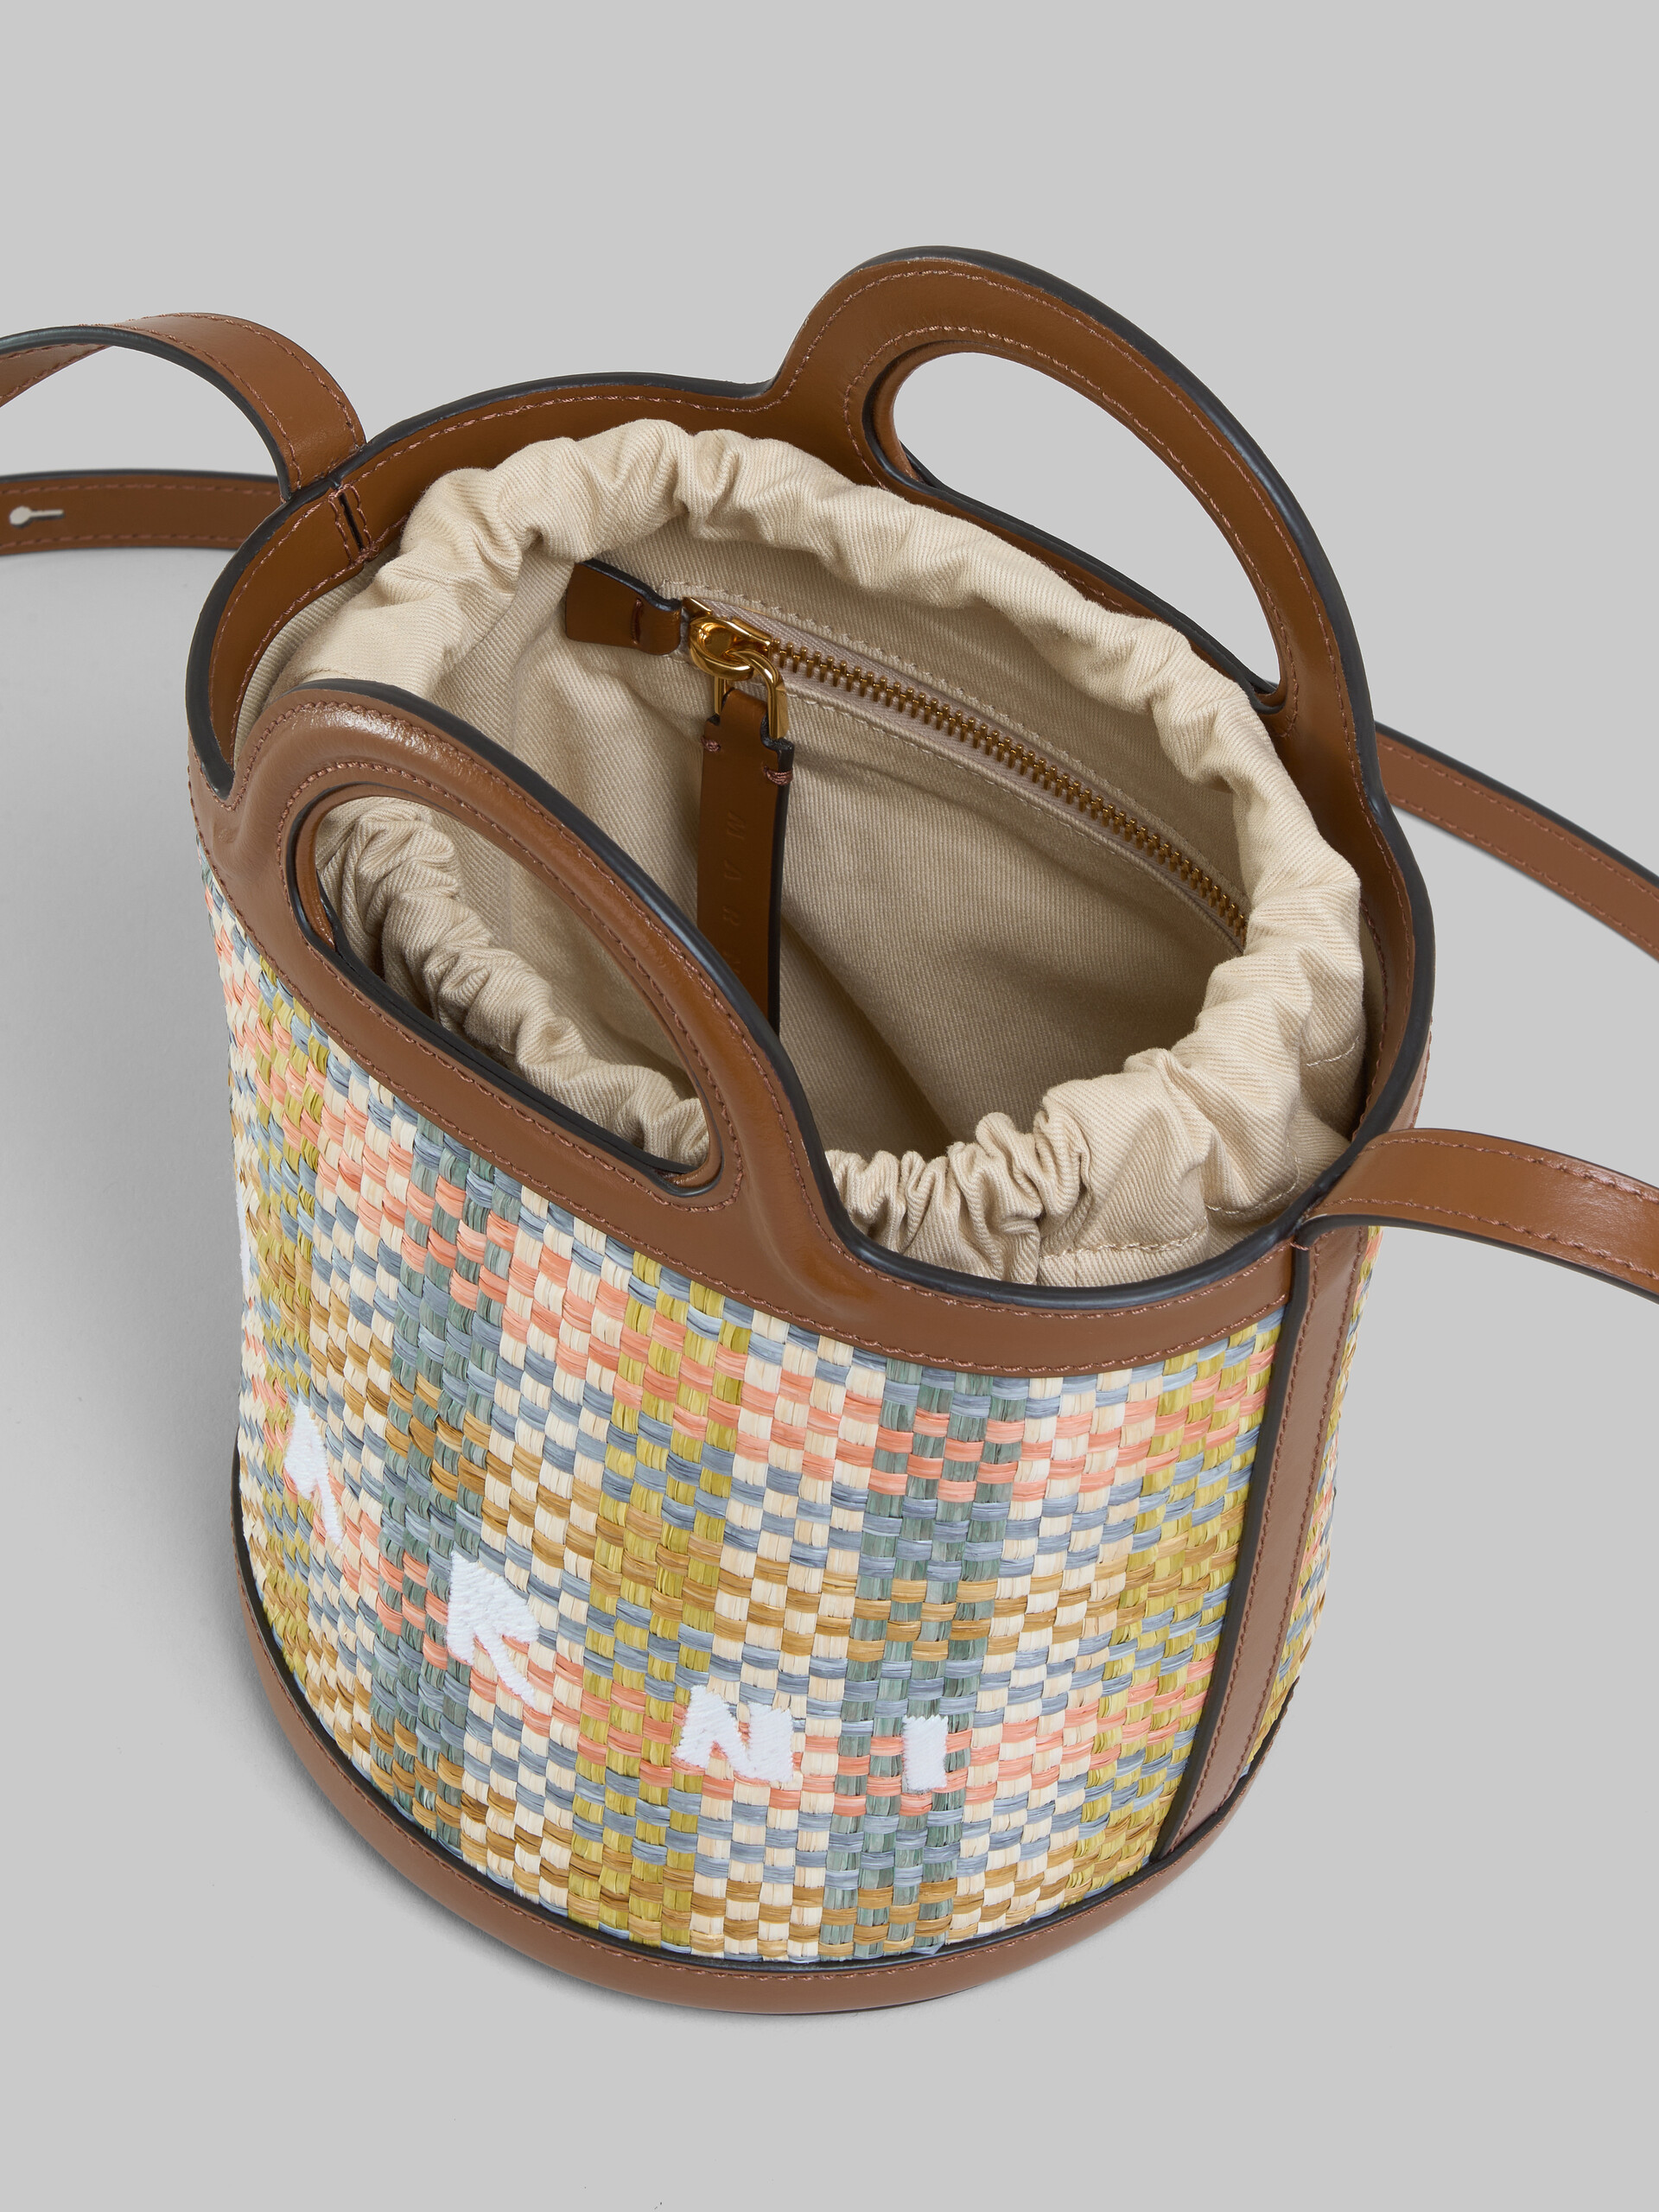 Tropicalia small bucket bag in brown leather and checked raffia-effect fabric - Shoulder Bags - Image 4